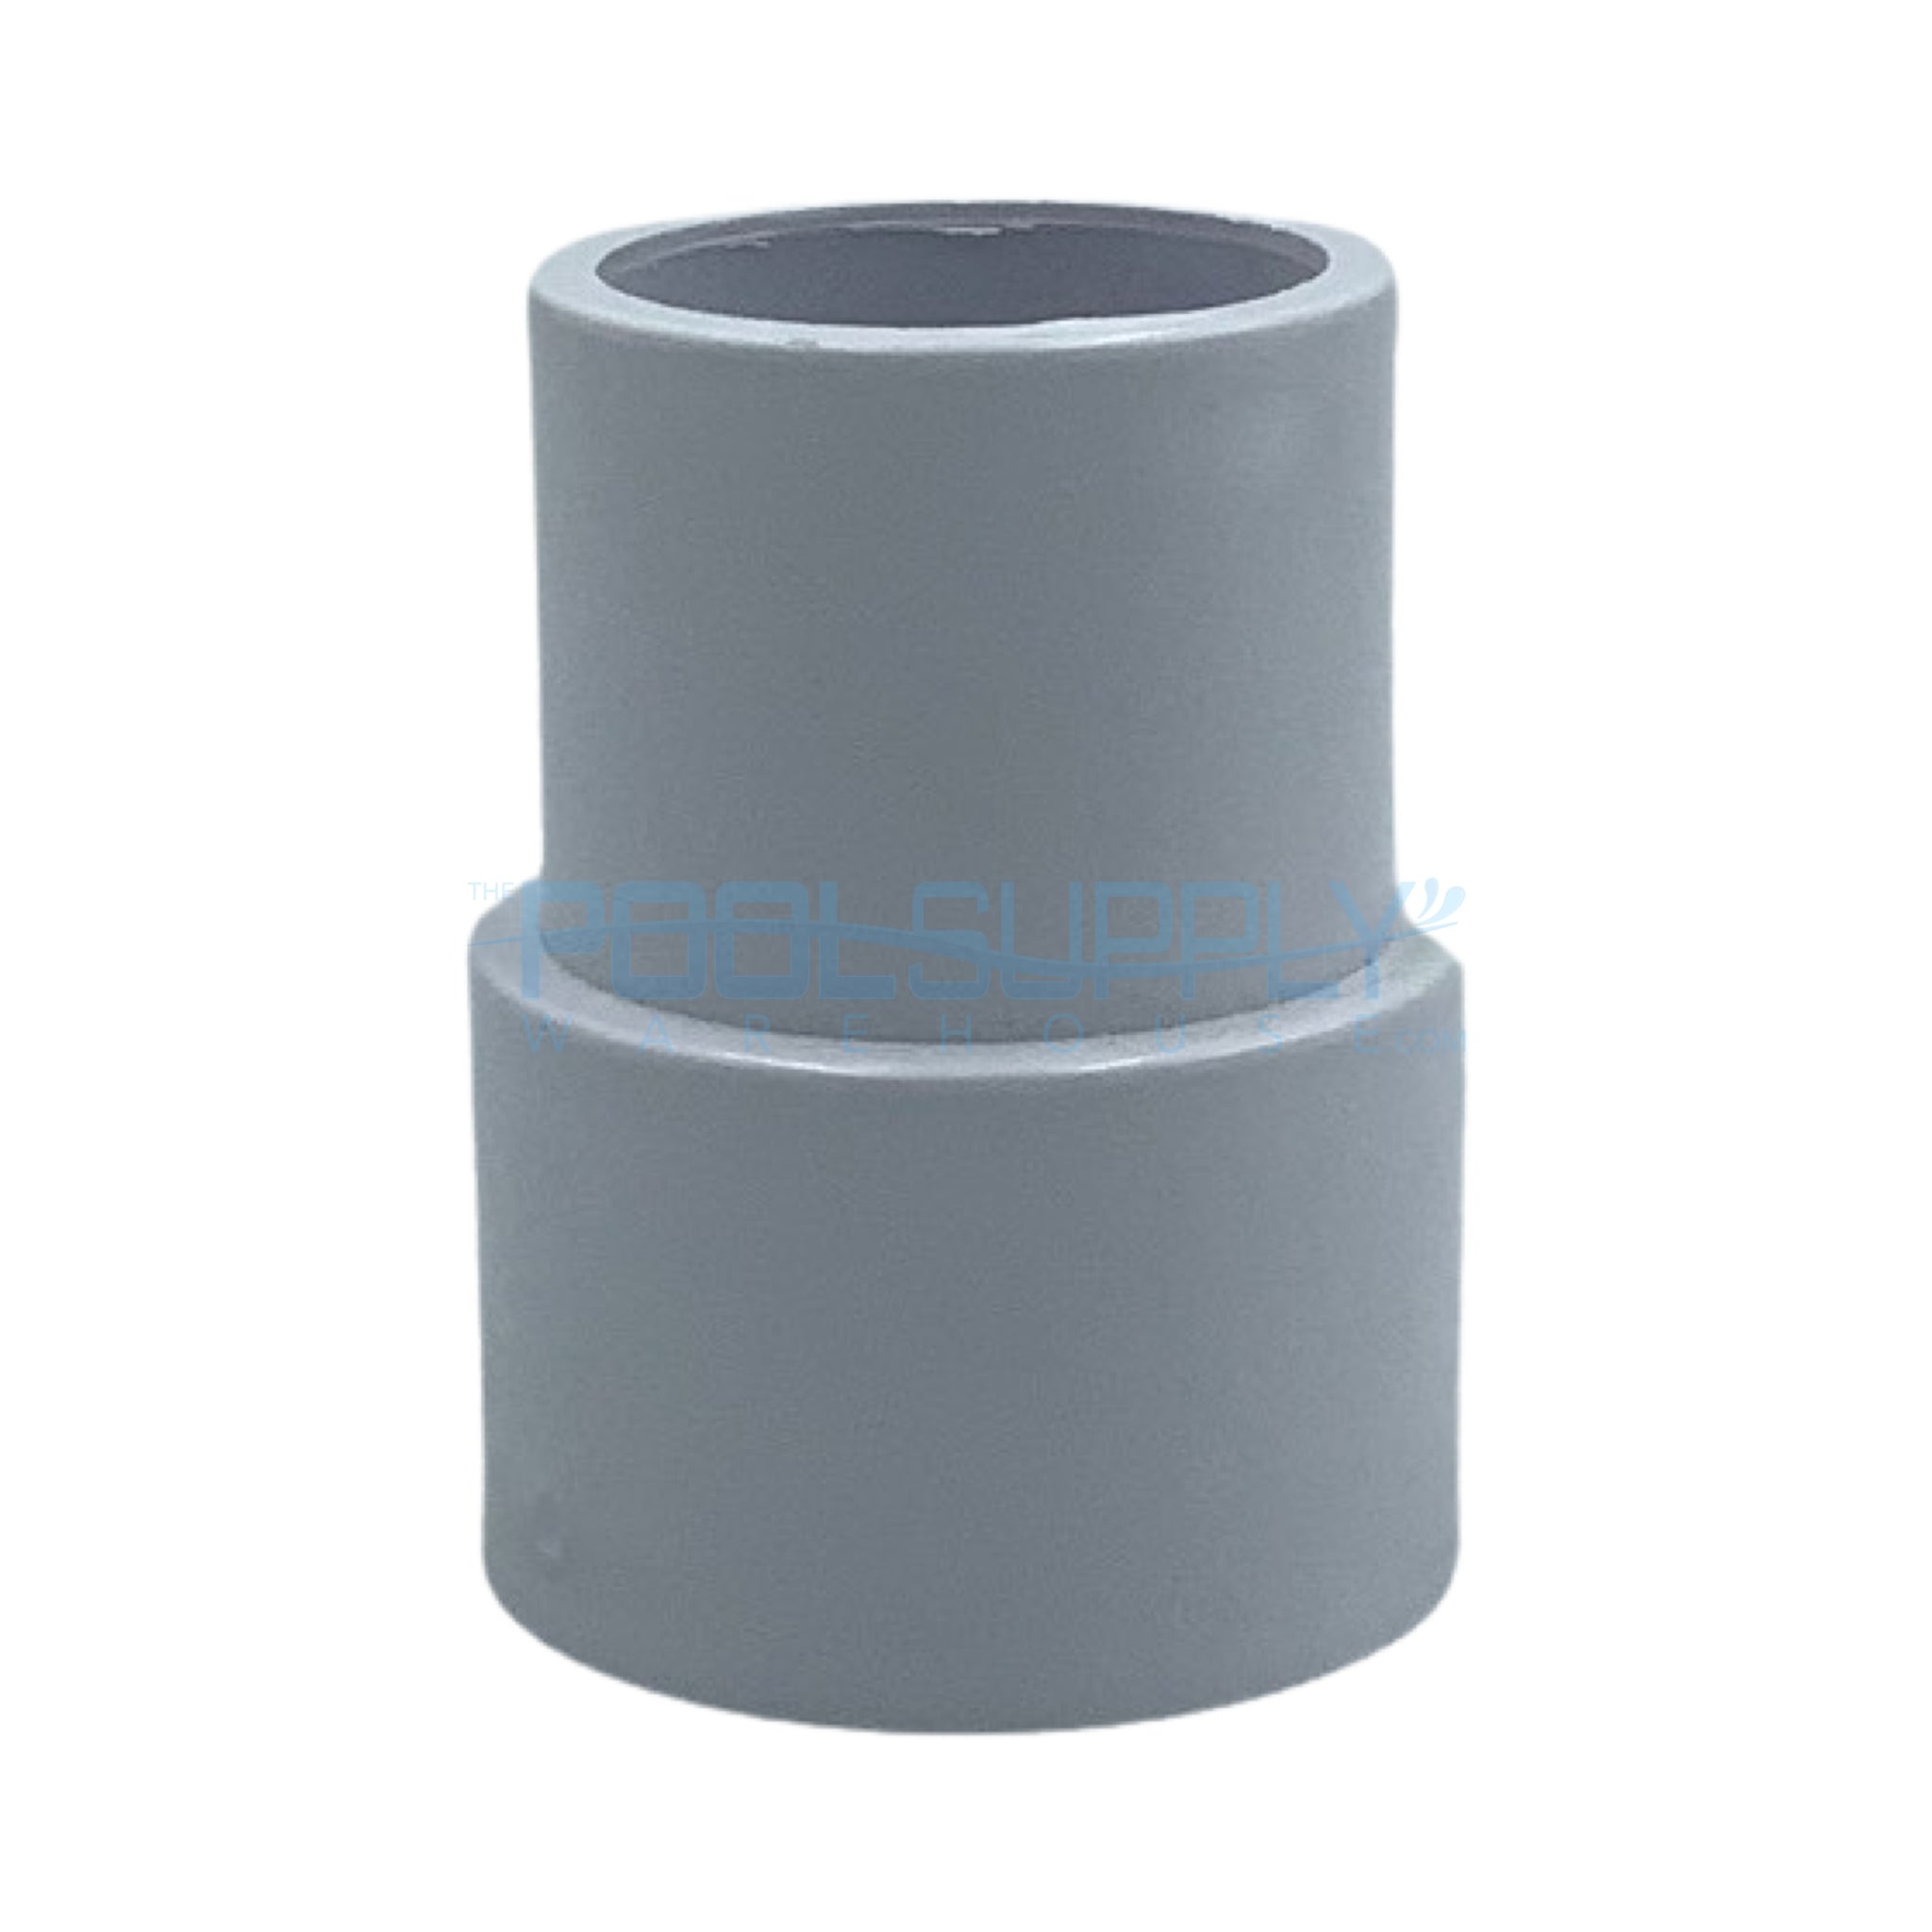 Super-Pro 1-1/2" SCH40 PVC Pipe Extender - SP0301-15 - The Pool Supply Warehouse